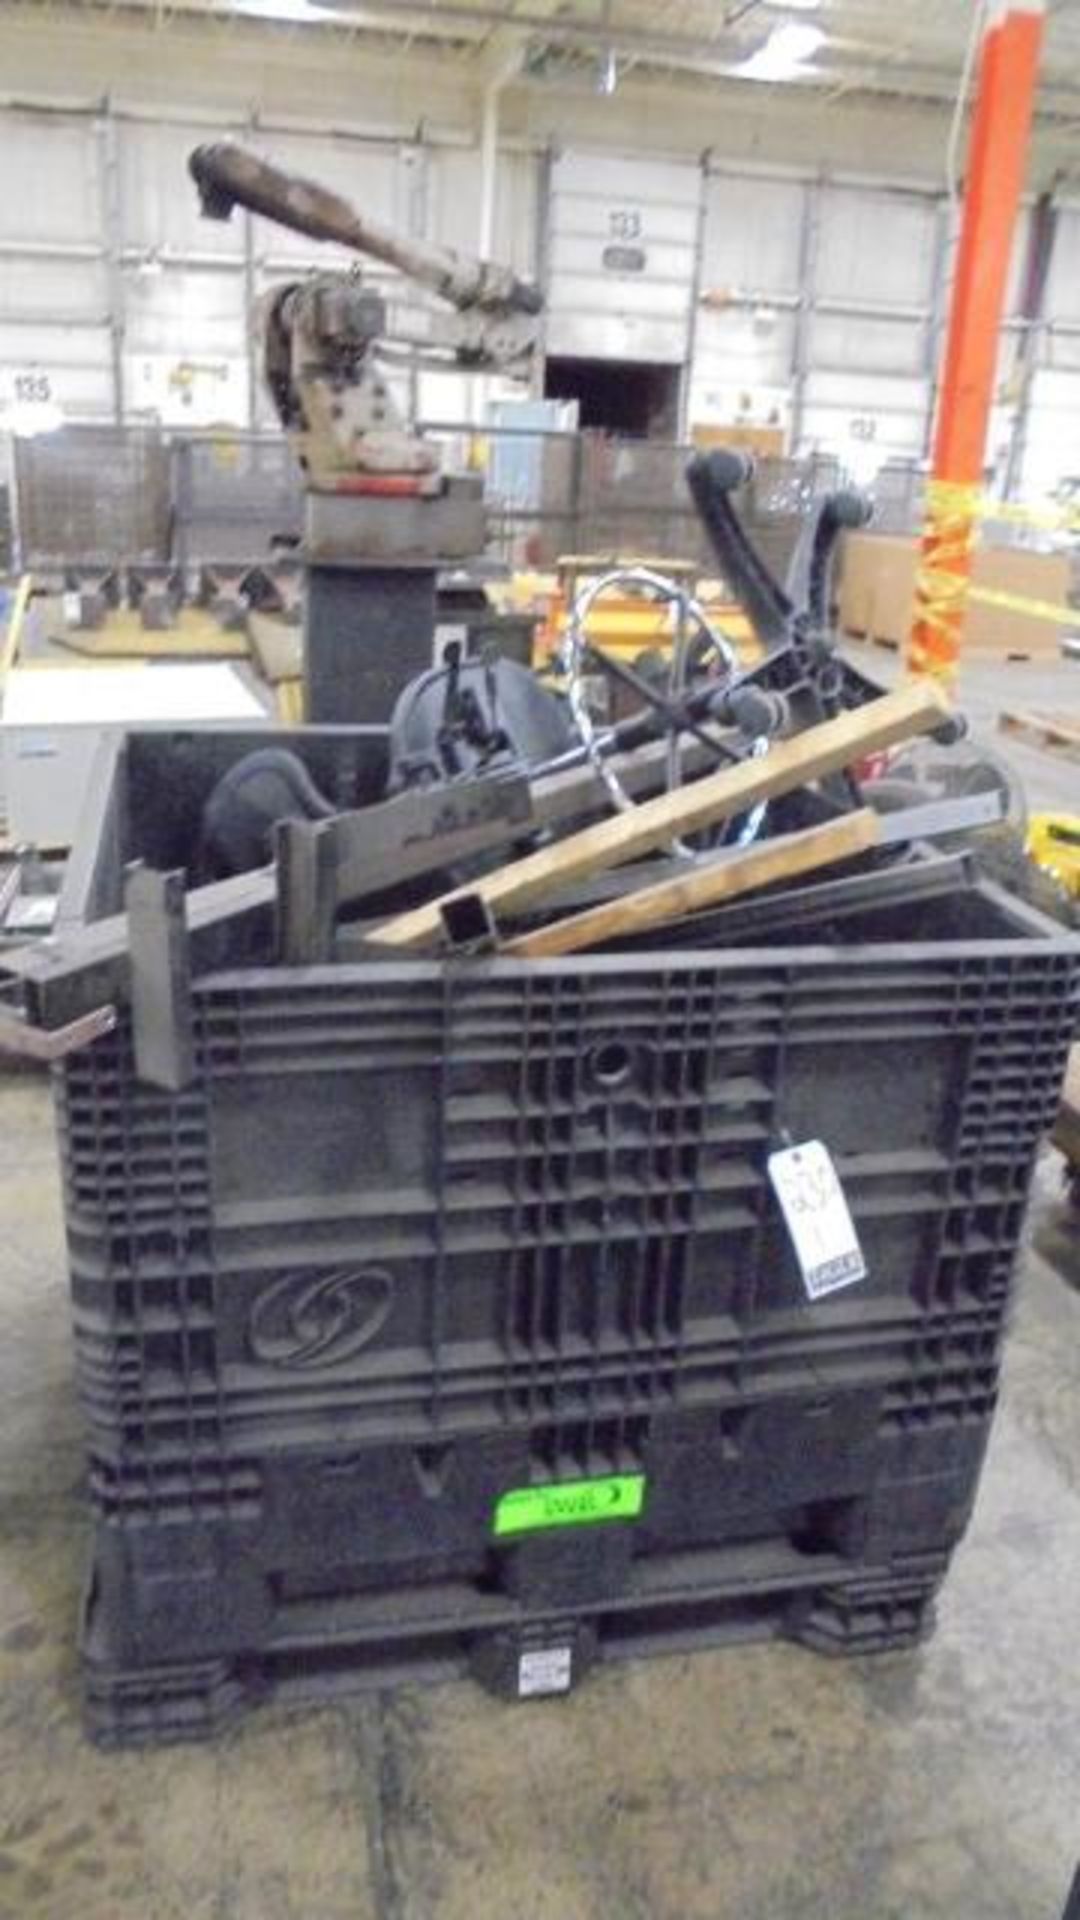 Lot Consisting of (4) Plastic Pallets, Plastic Crates, Weigh Scale, Steel Square Tubing, Cylinder, - Image 5 of 6